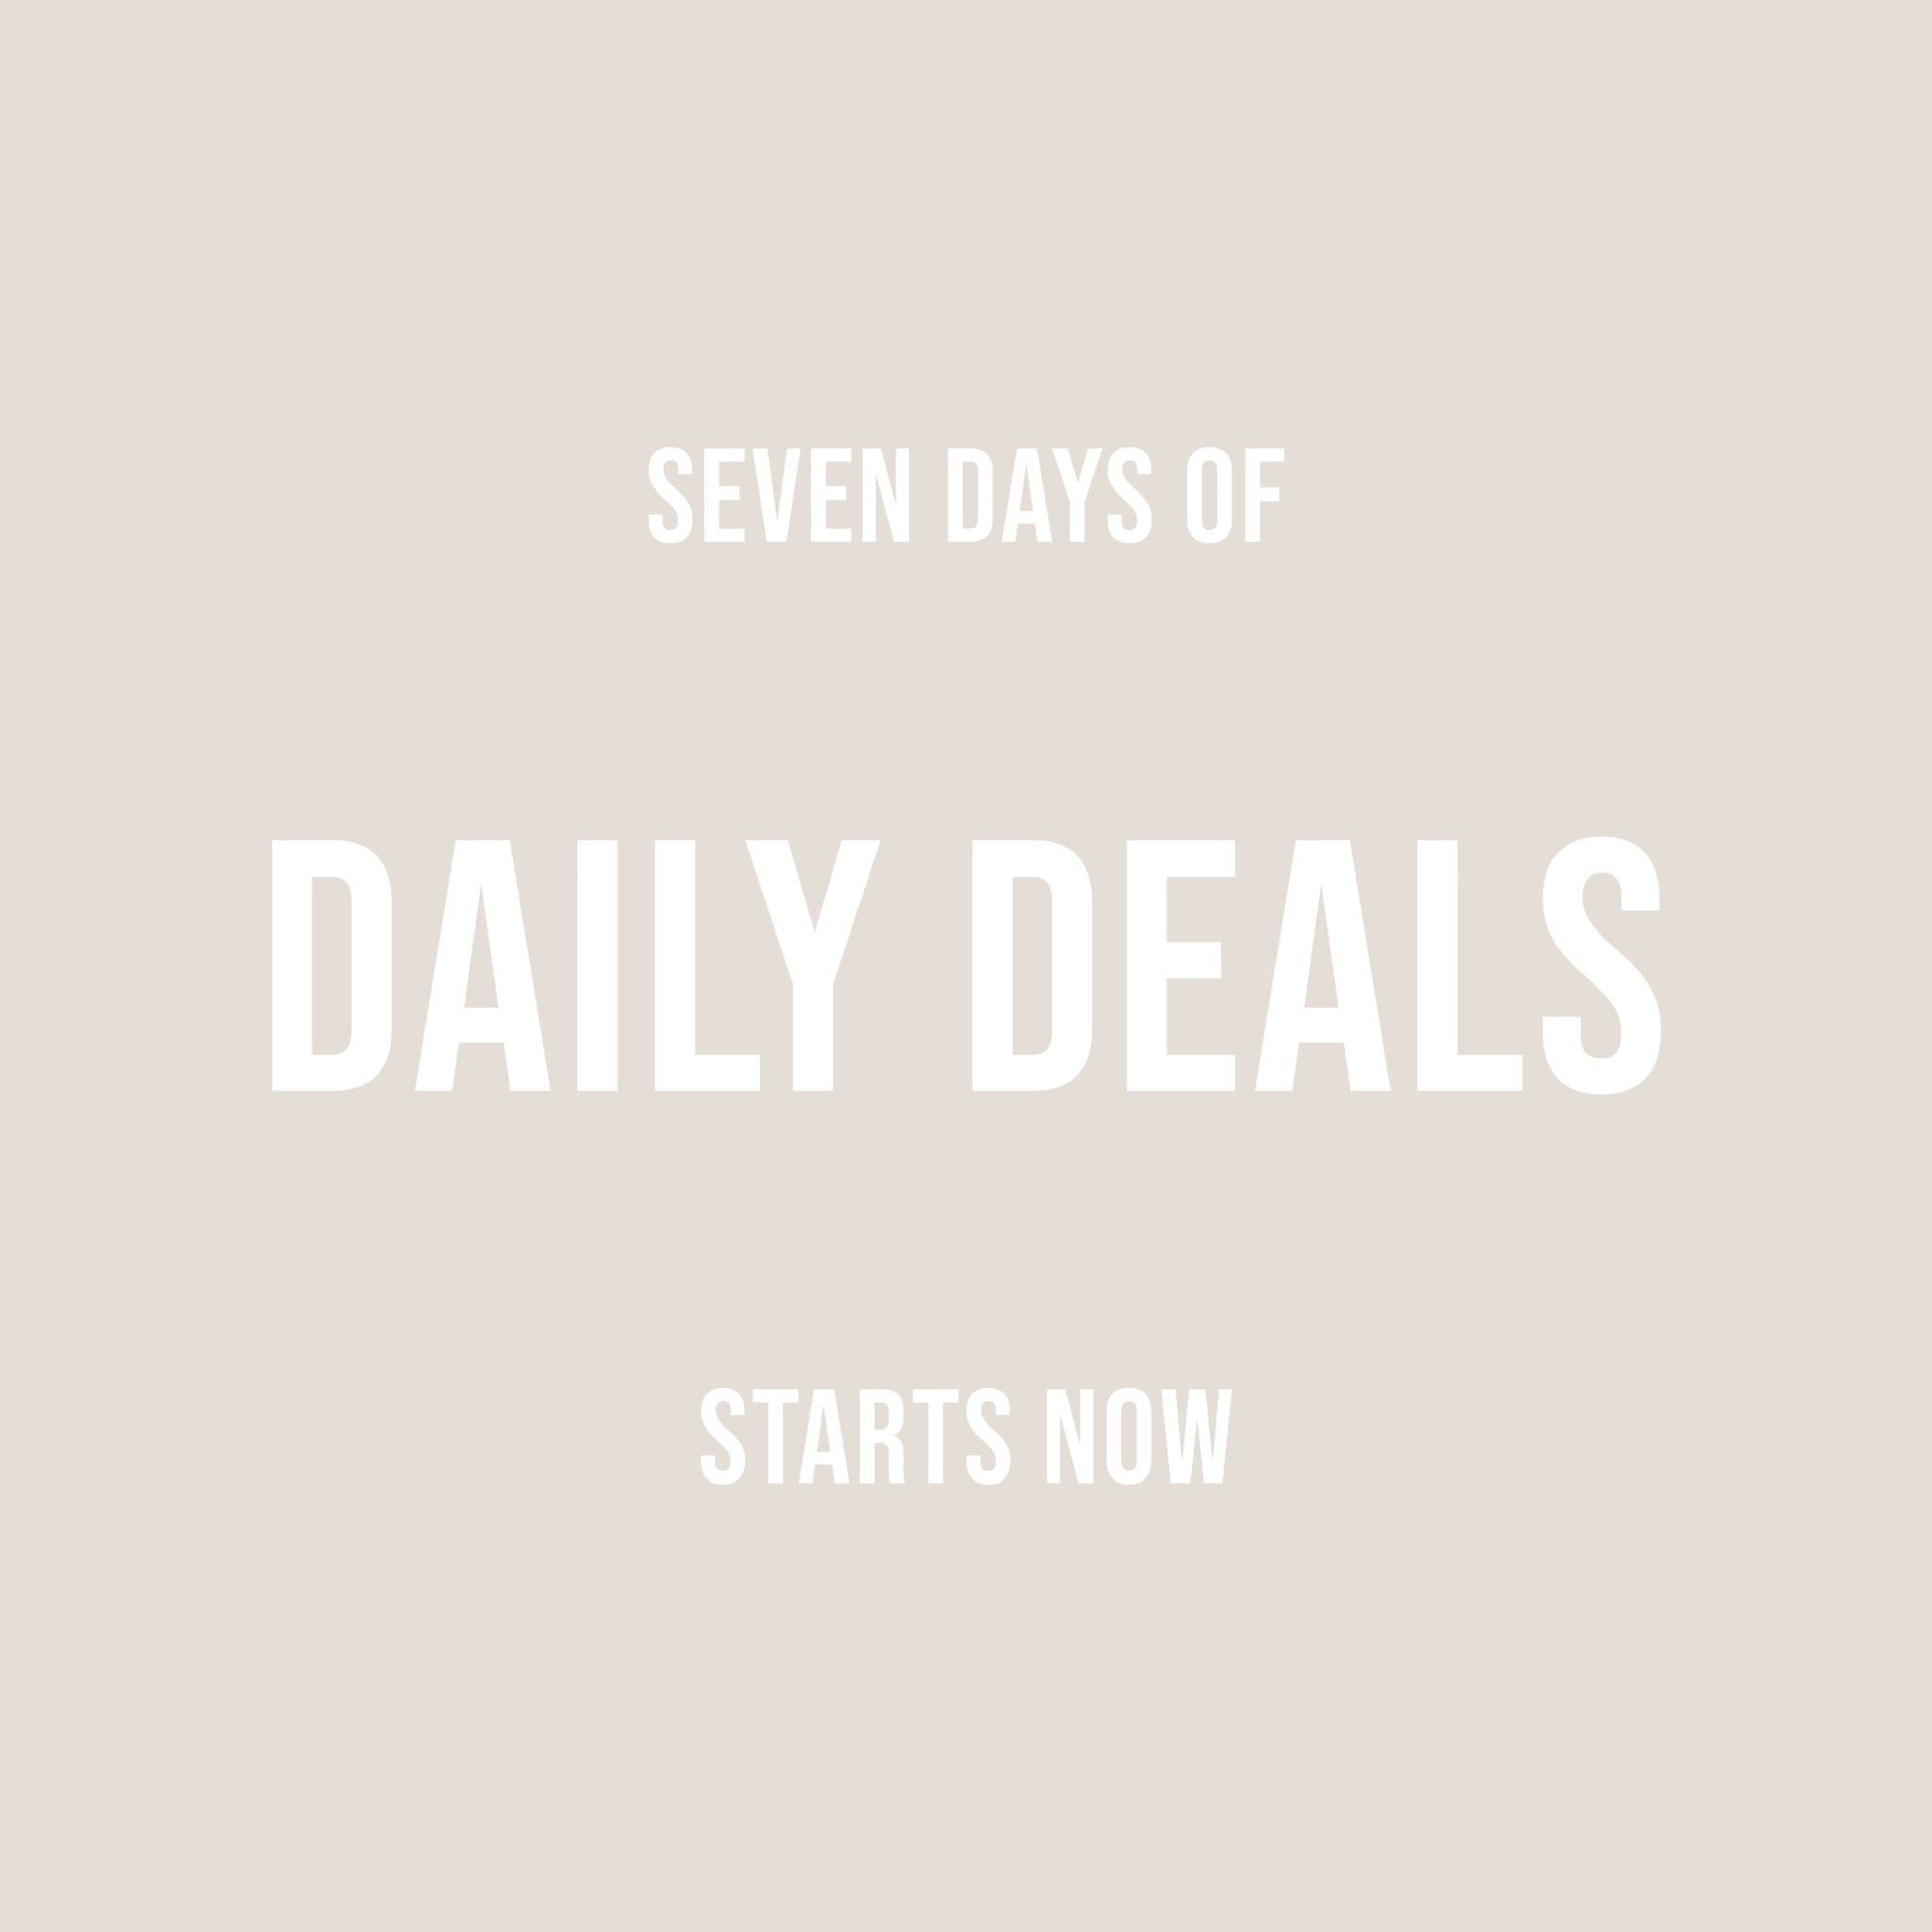 Our week of Daily Deals starts NOW!